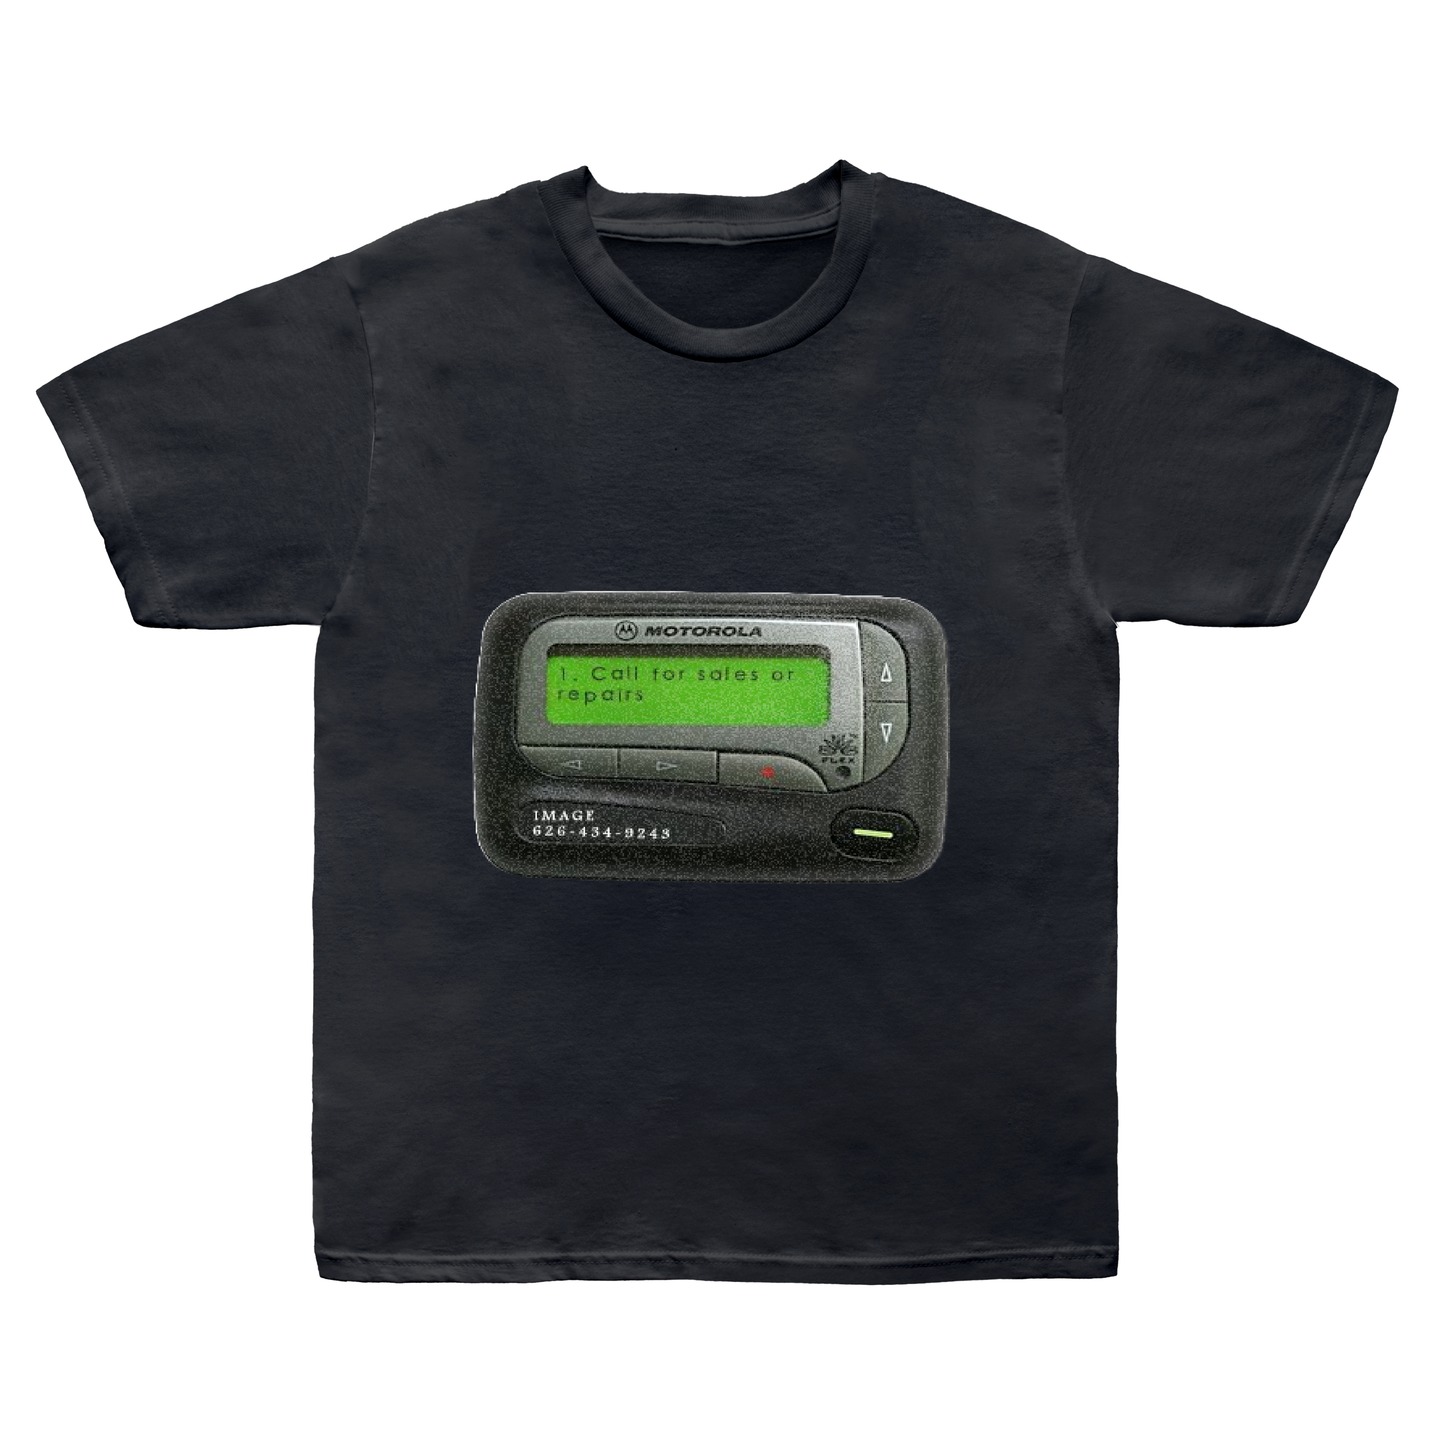 "Pager" T-Shirt.